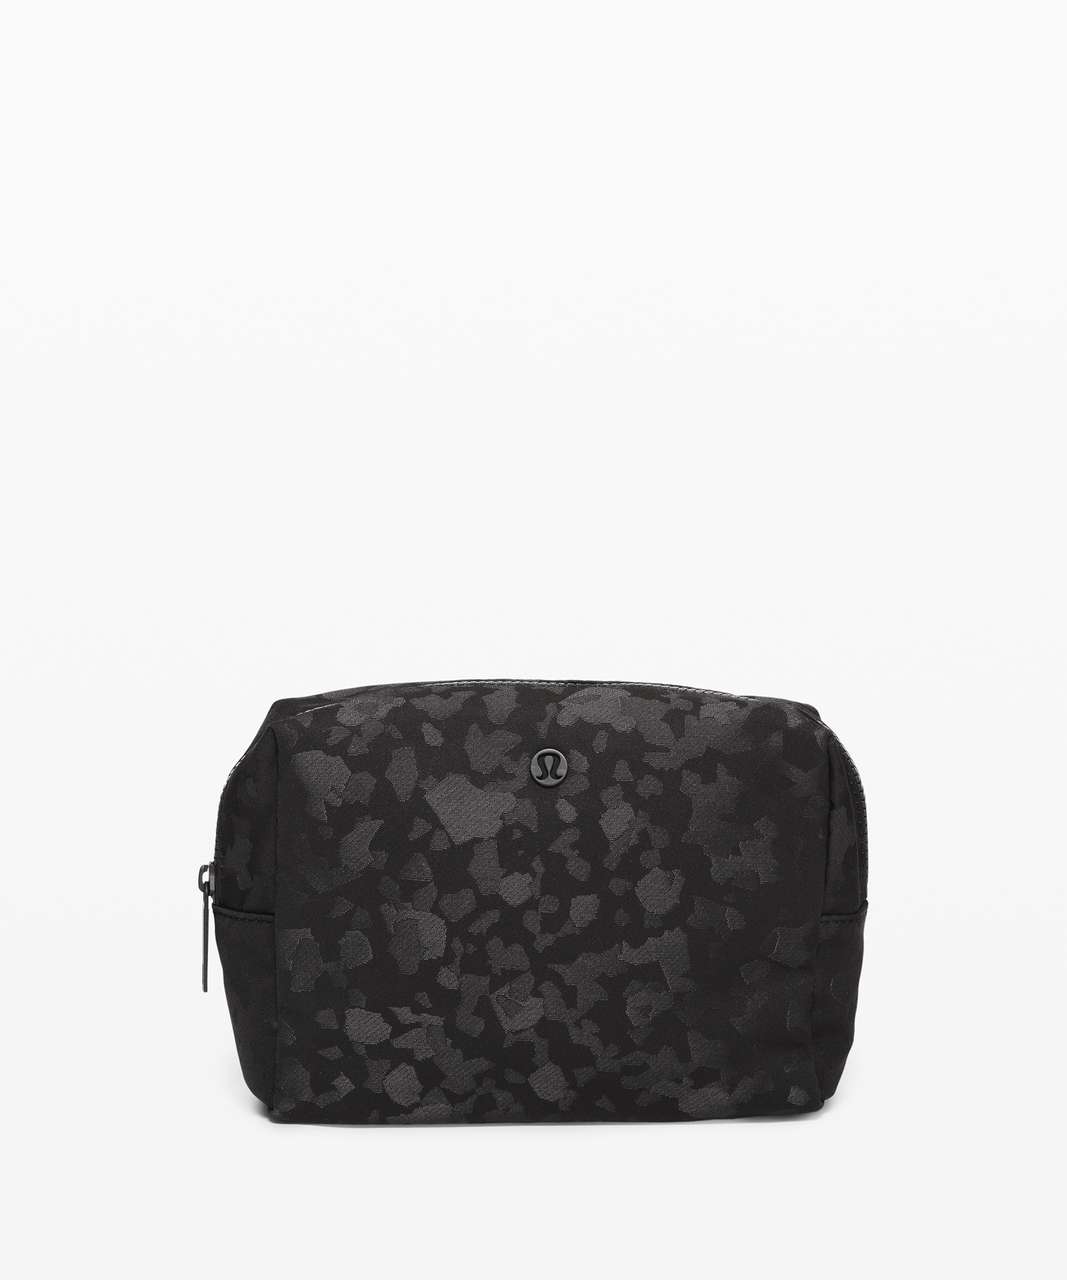 Lululemon All Your Small Things Pouch *4L - Fragment Camo Jacquard Black Deep Coal